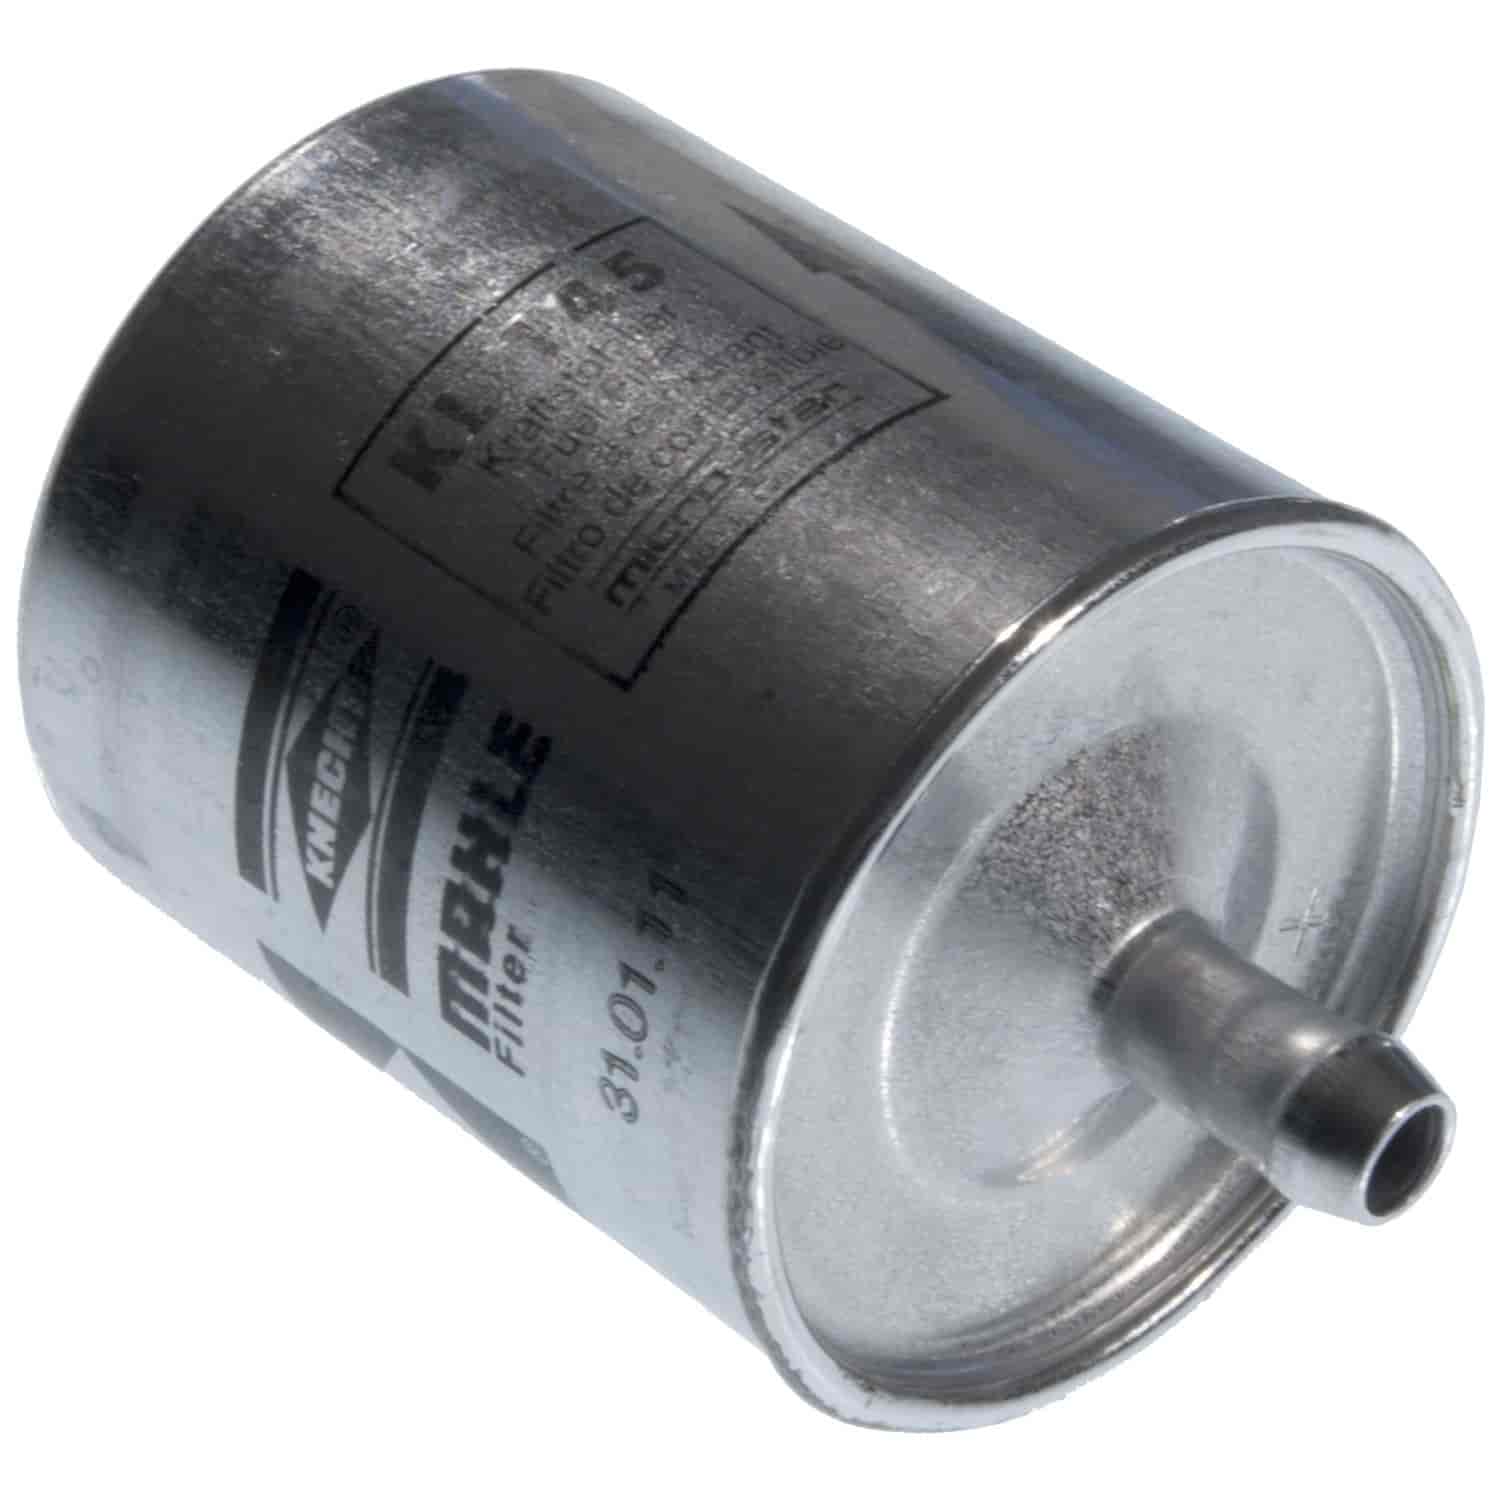 Mahle Fuel Filter 1983-2010 BMW/Motorcycle & Ducati